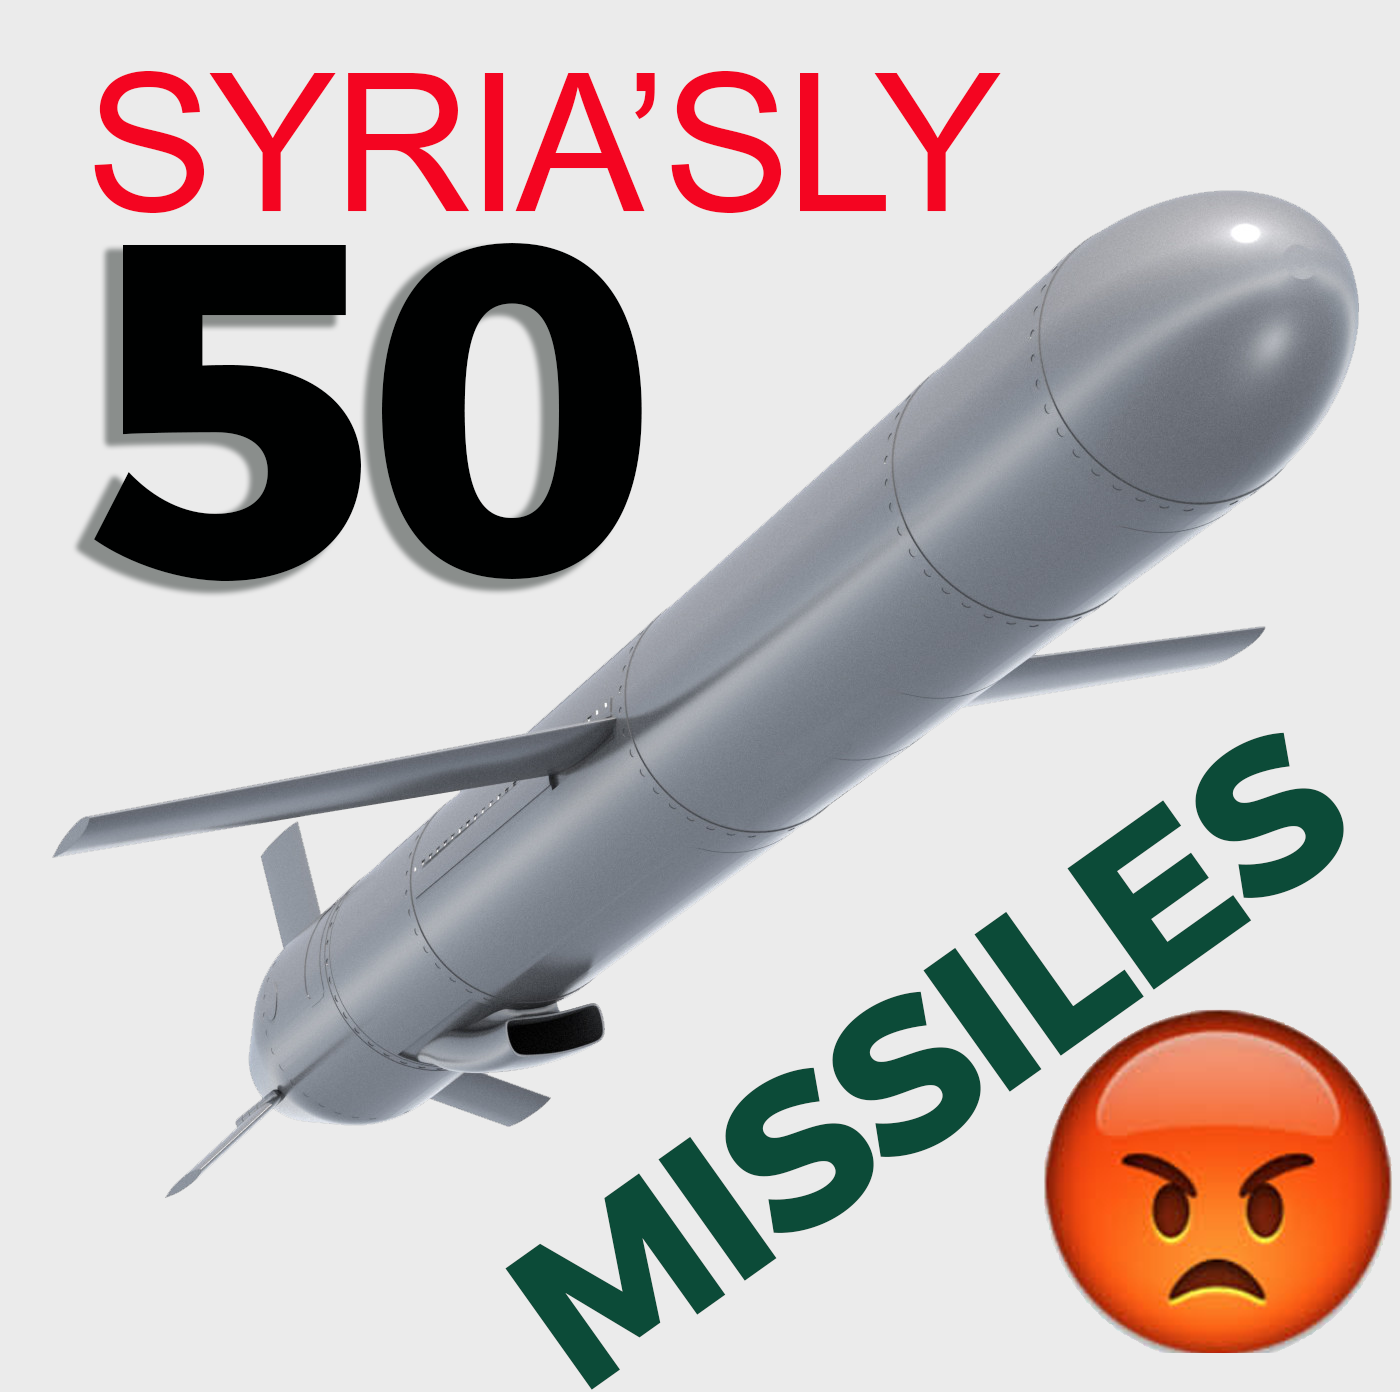 Syria’sly 50 Missiles???